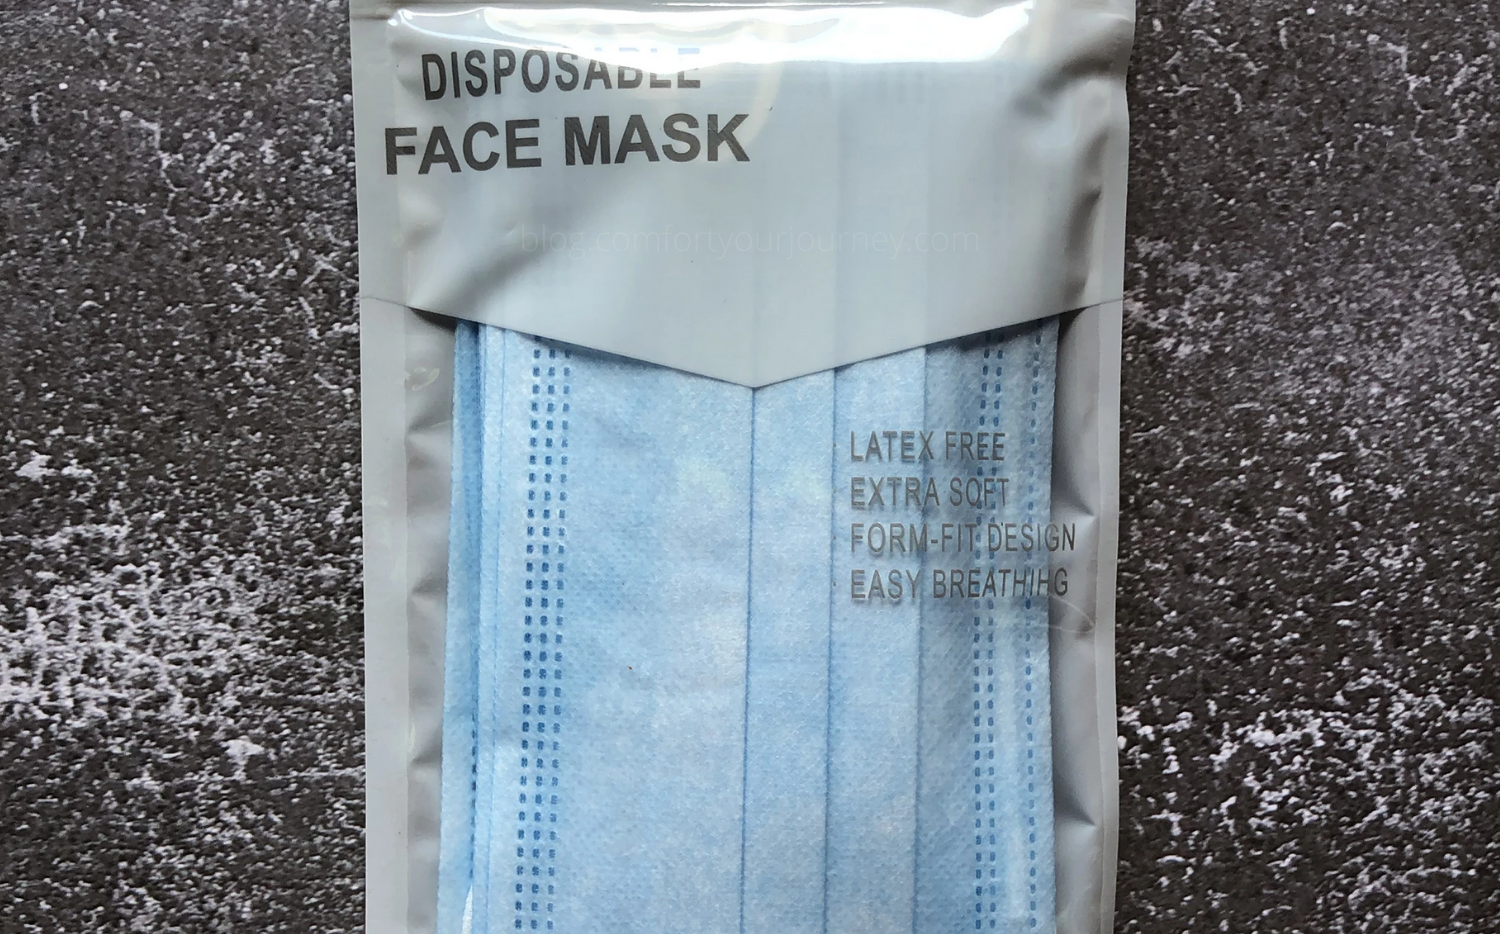 KEEP THE DISPOSABLE EXTRA MASKS